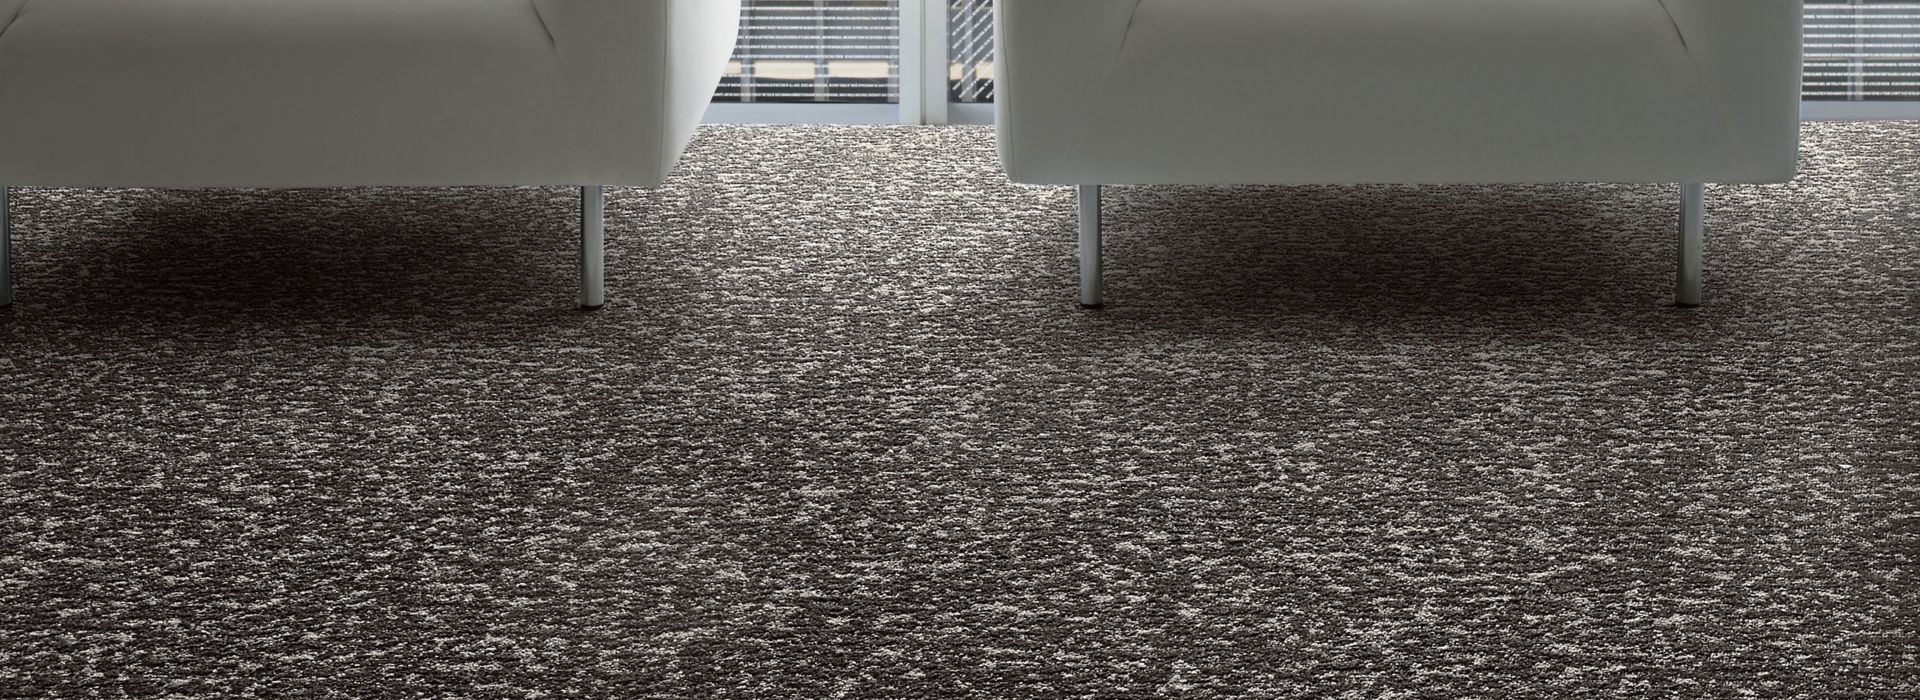 Interface Vessel square carpet tile with chairs in front of window imagen número 2